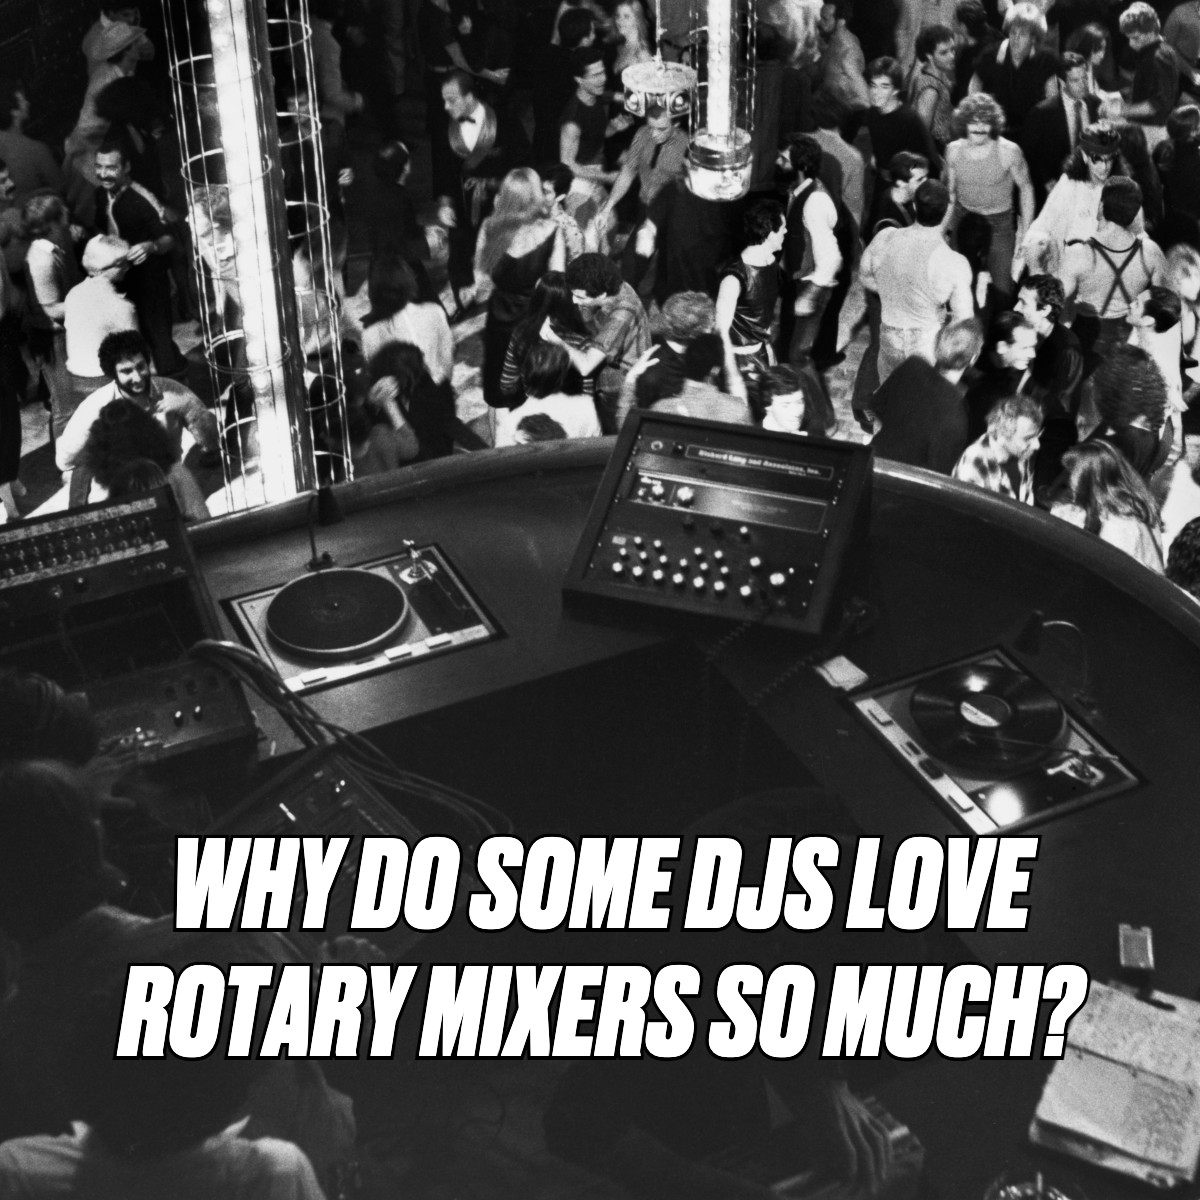 What is it about rotary mixers that has created such a passionate community of users? We asked 11 DJs to share their thoughts and experiences. Read the story on our blog, The Bridge: bit.ly/3UlhVnd How do you feel about rotary mixers? Let us know below. #PioneerDJ